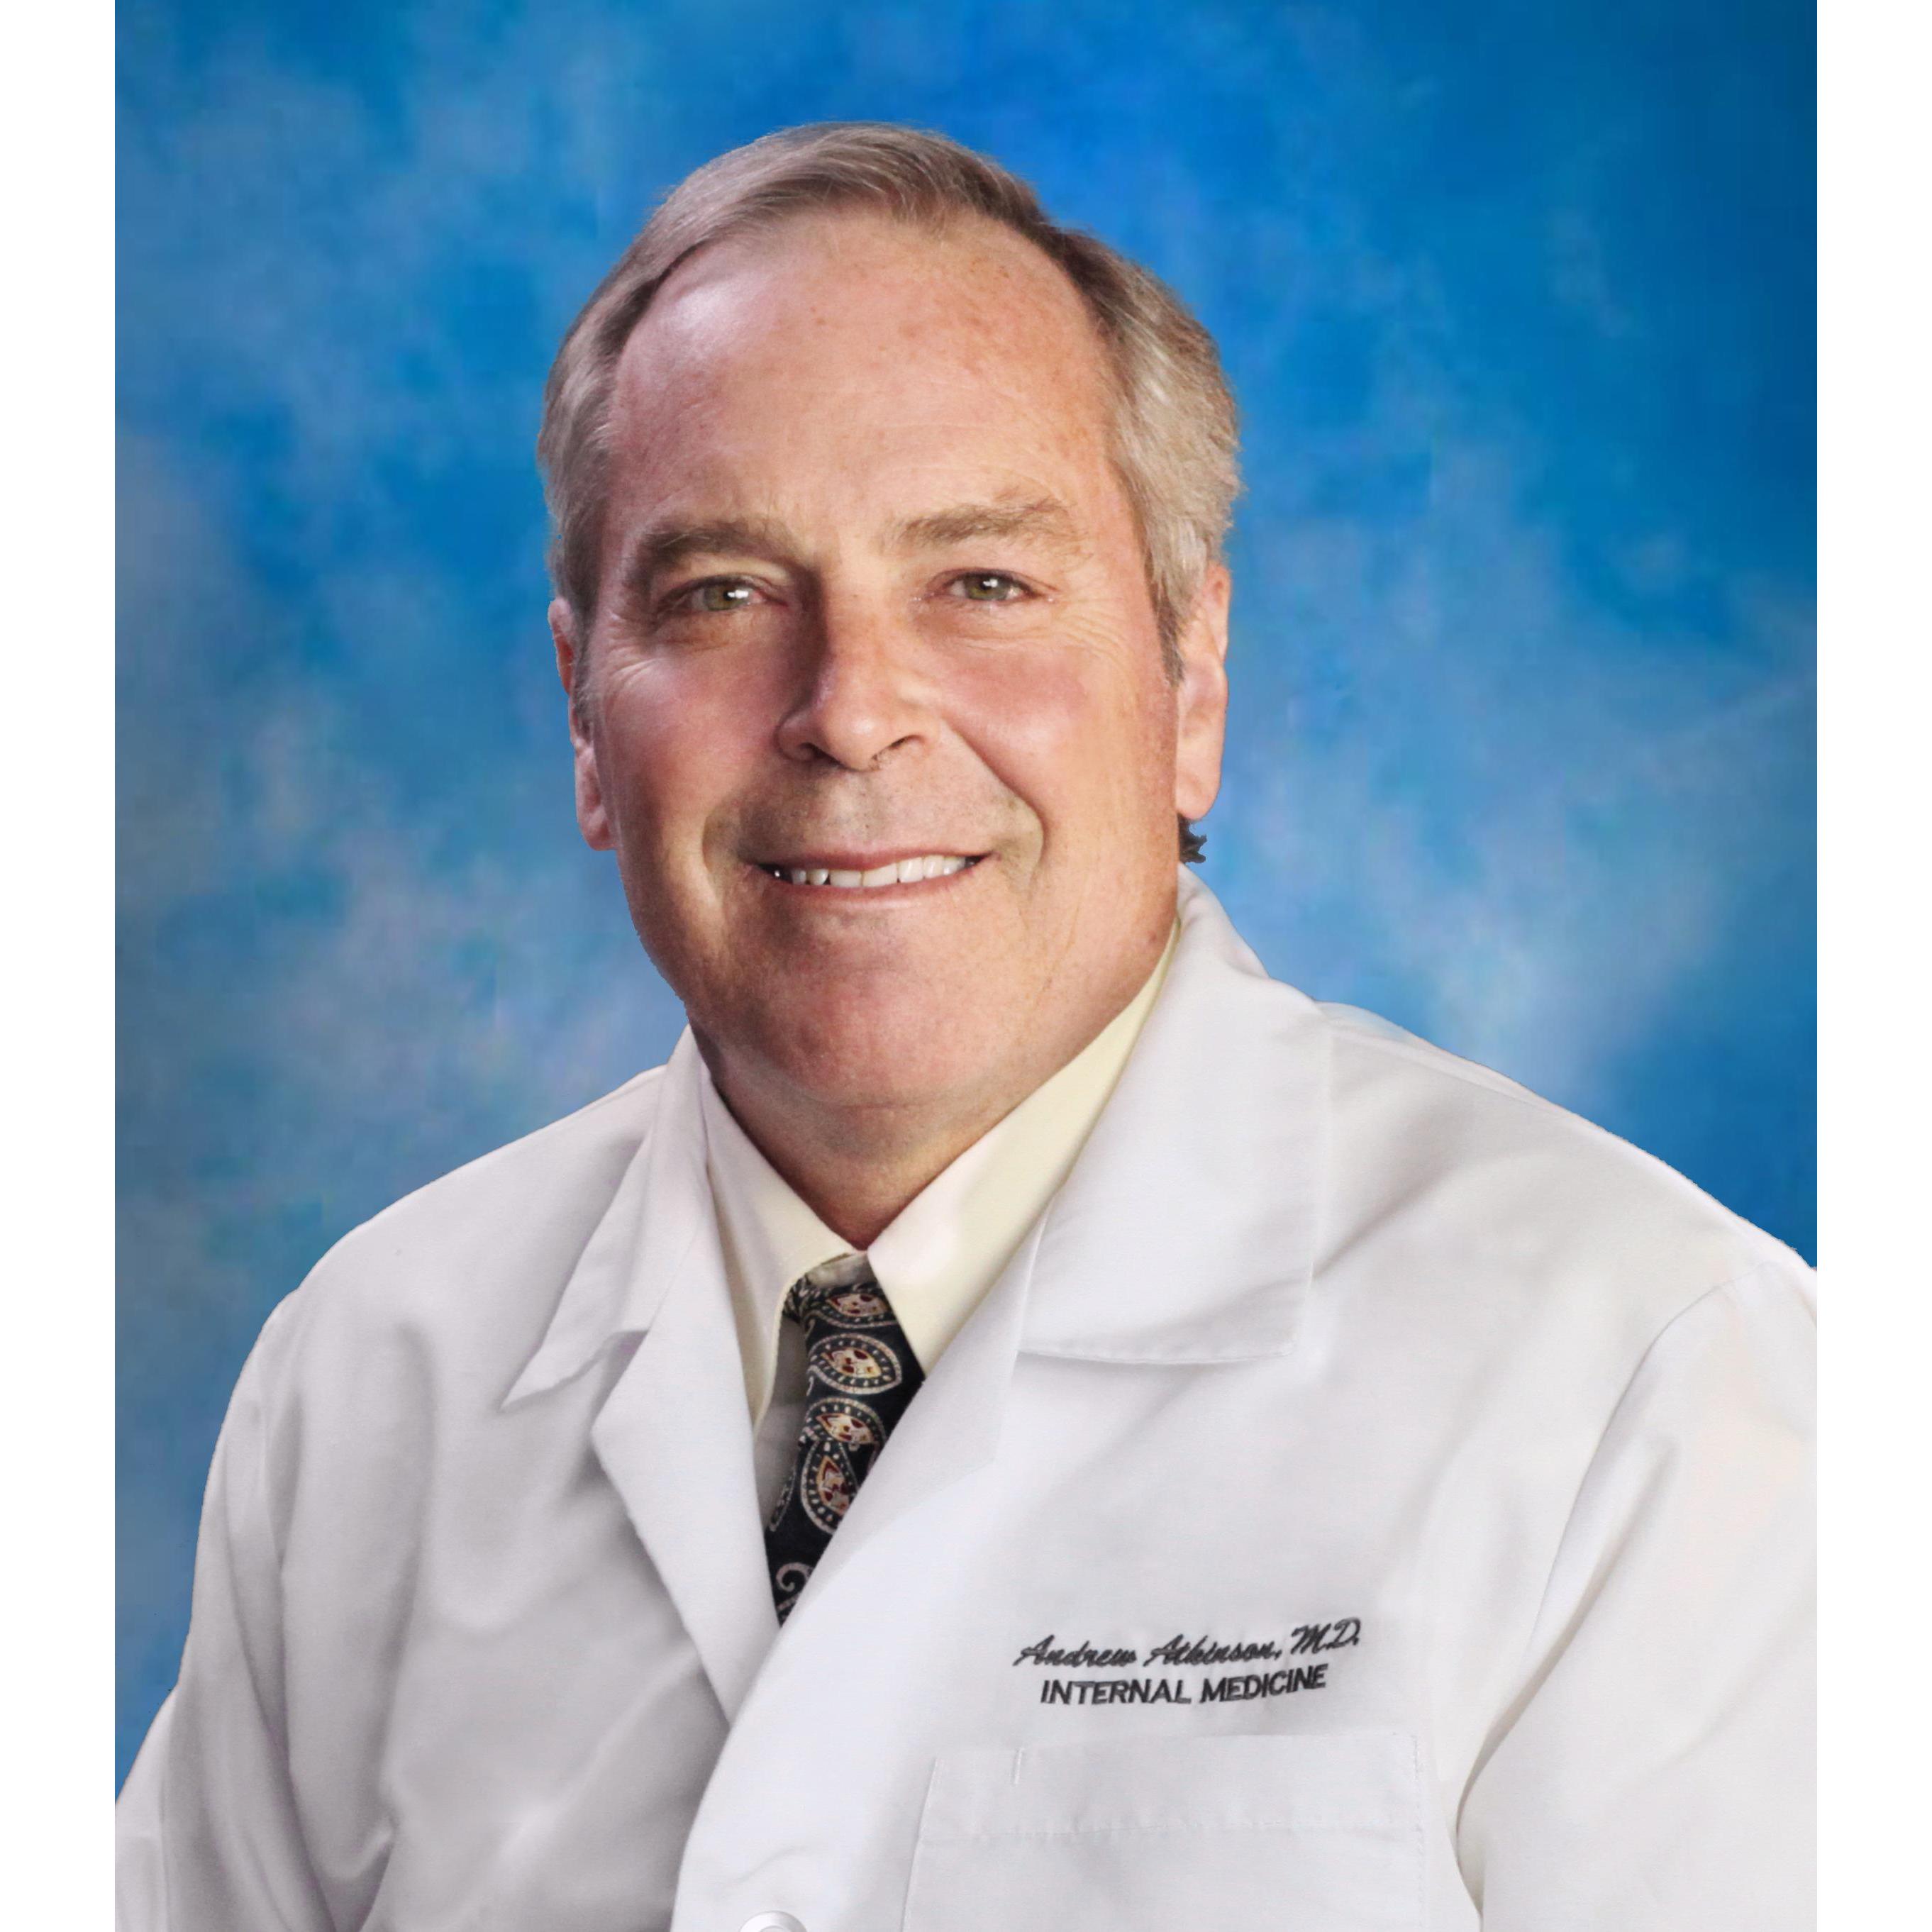 Dr. Andrew M. Atkinson, MD